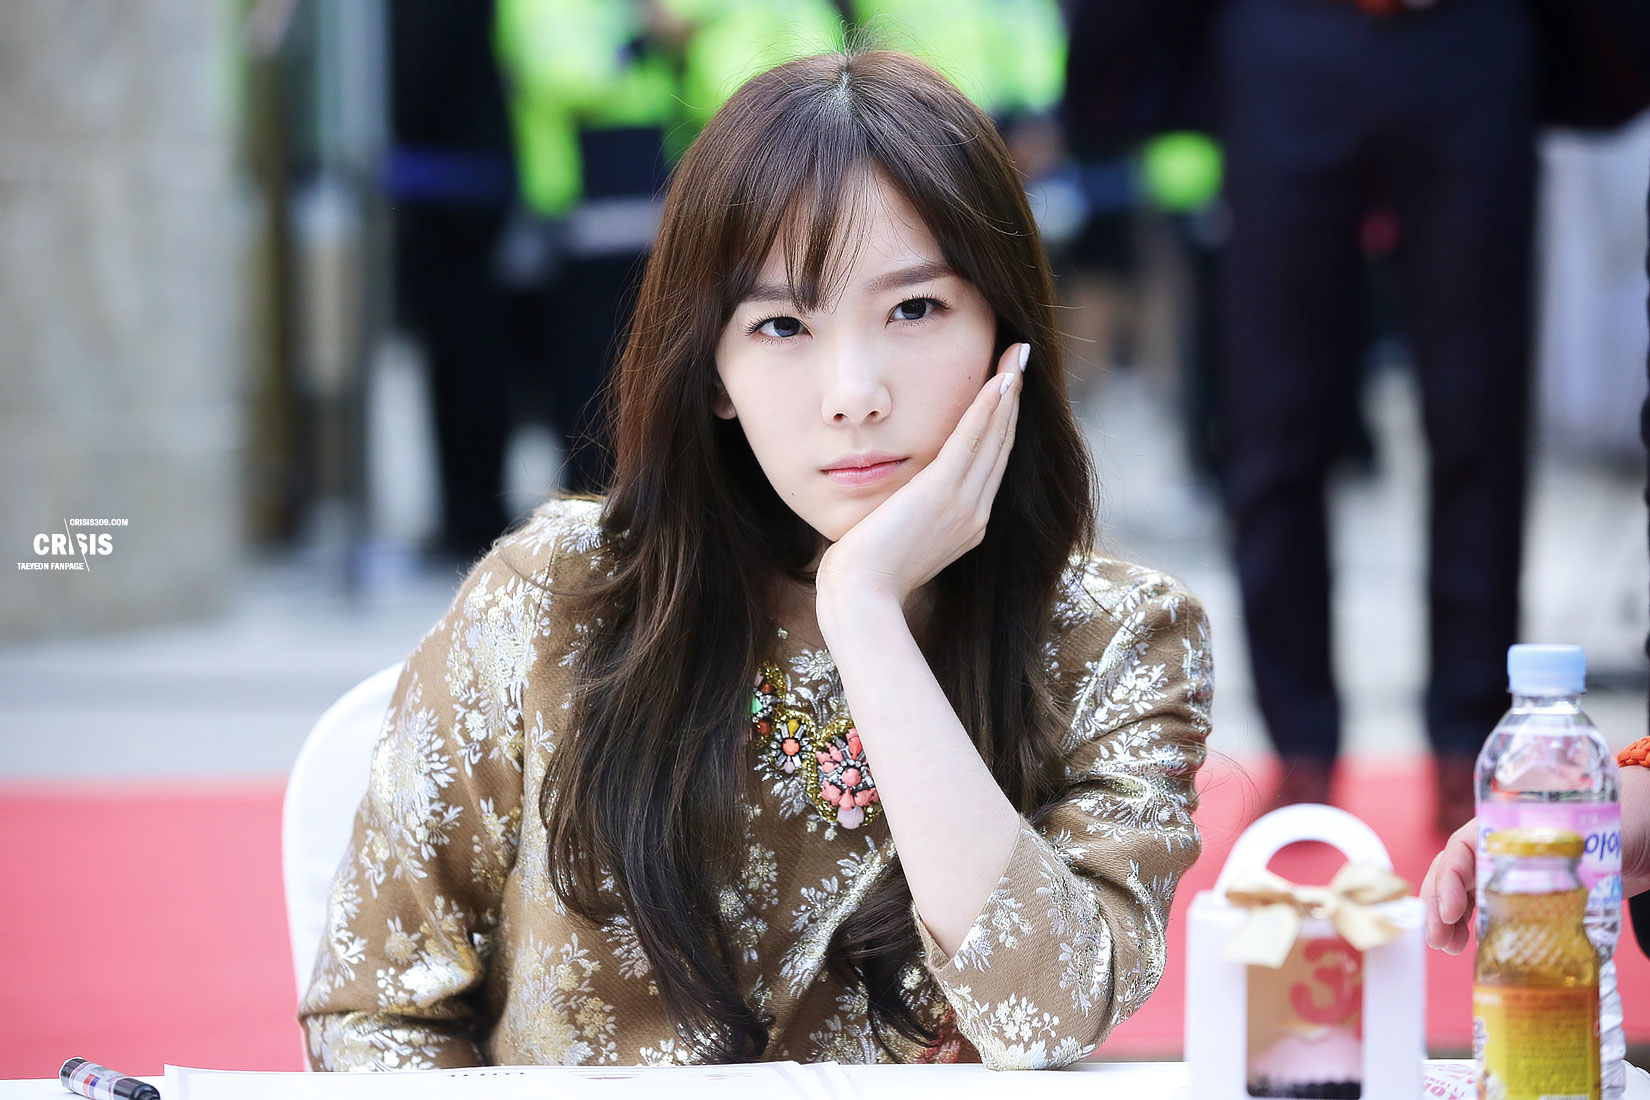 Taeyeon @ Lotte Department Store fansign